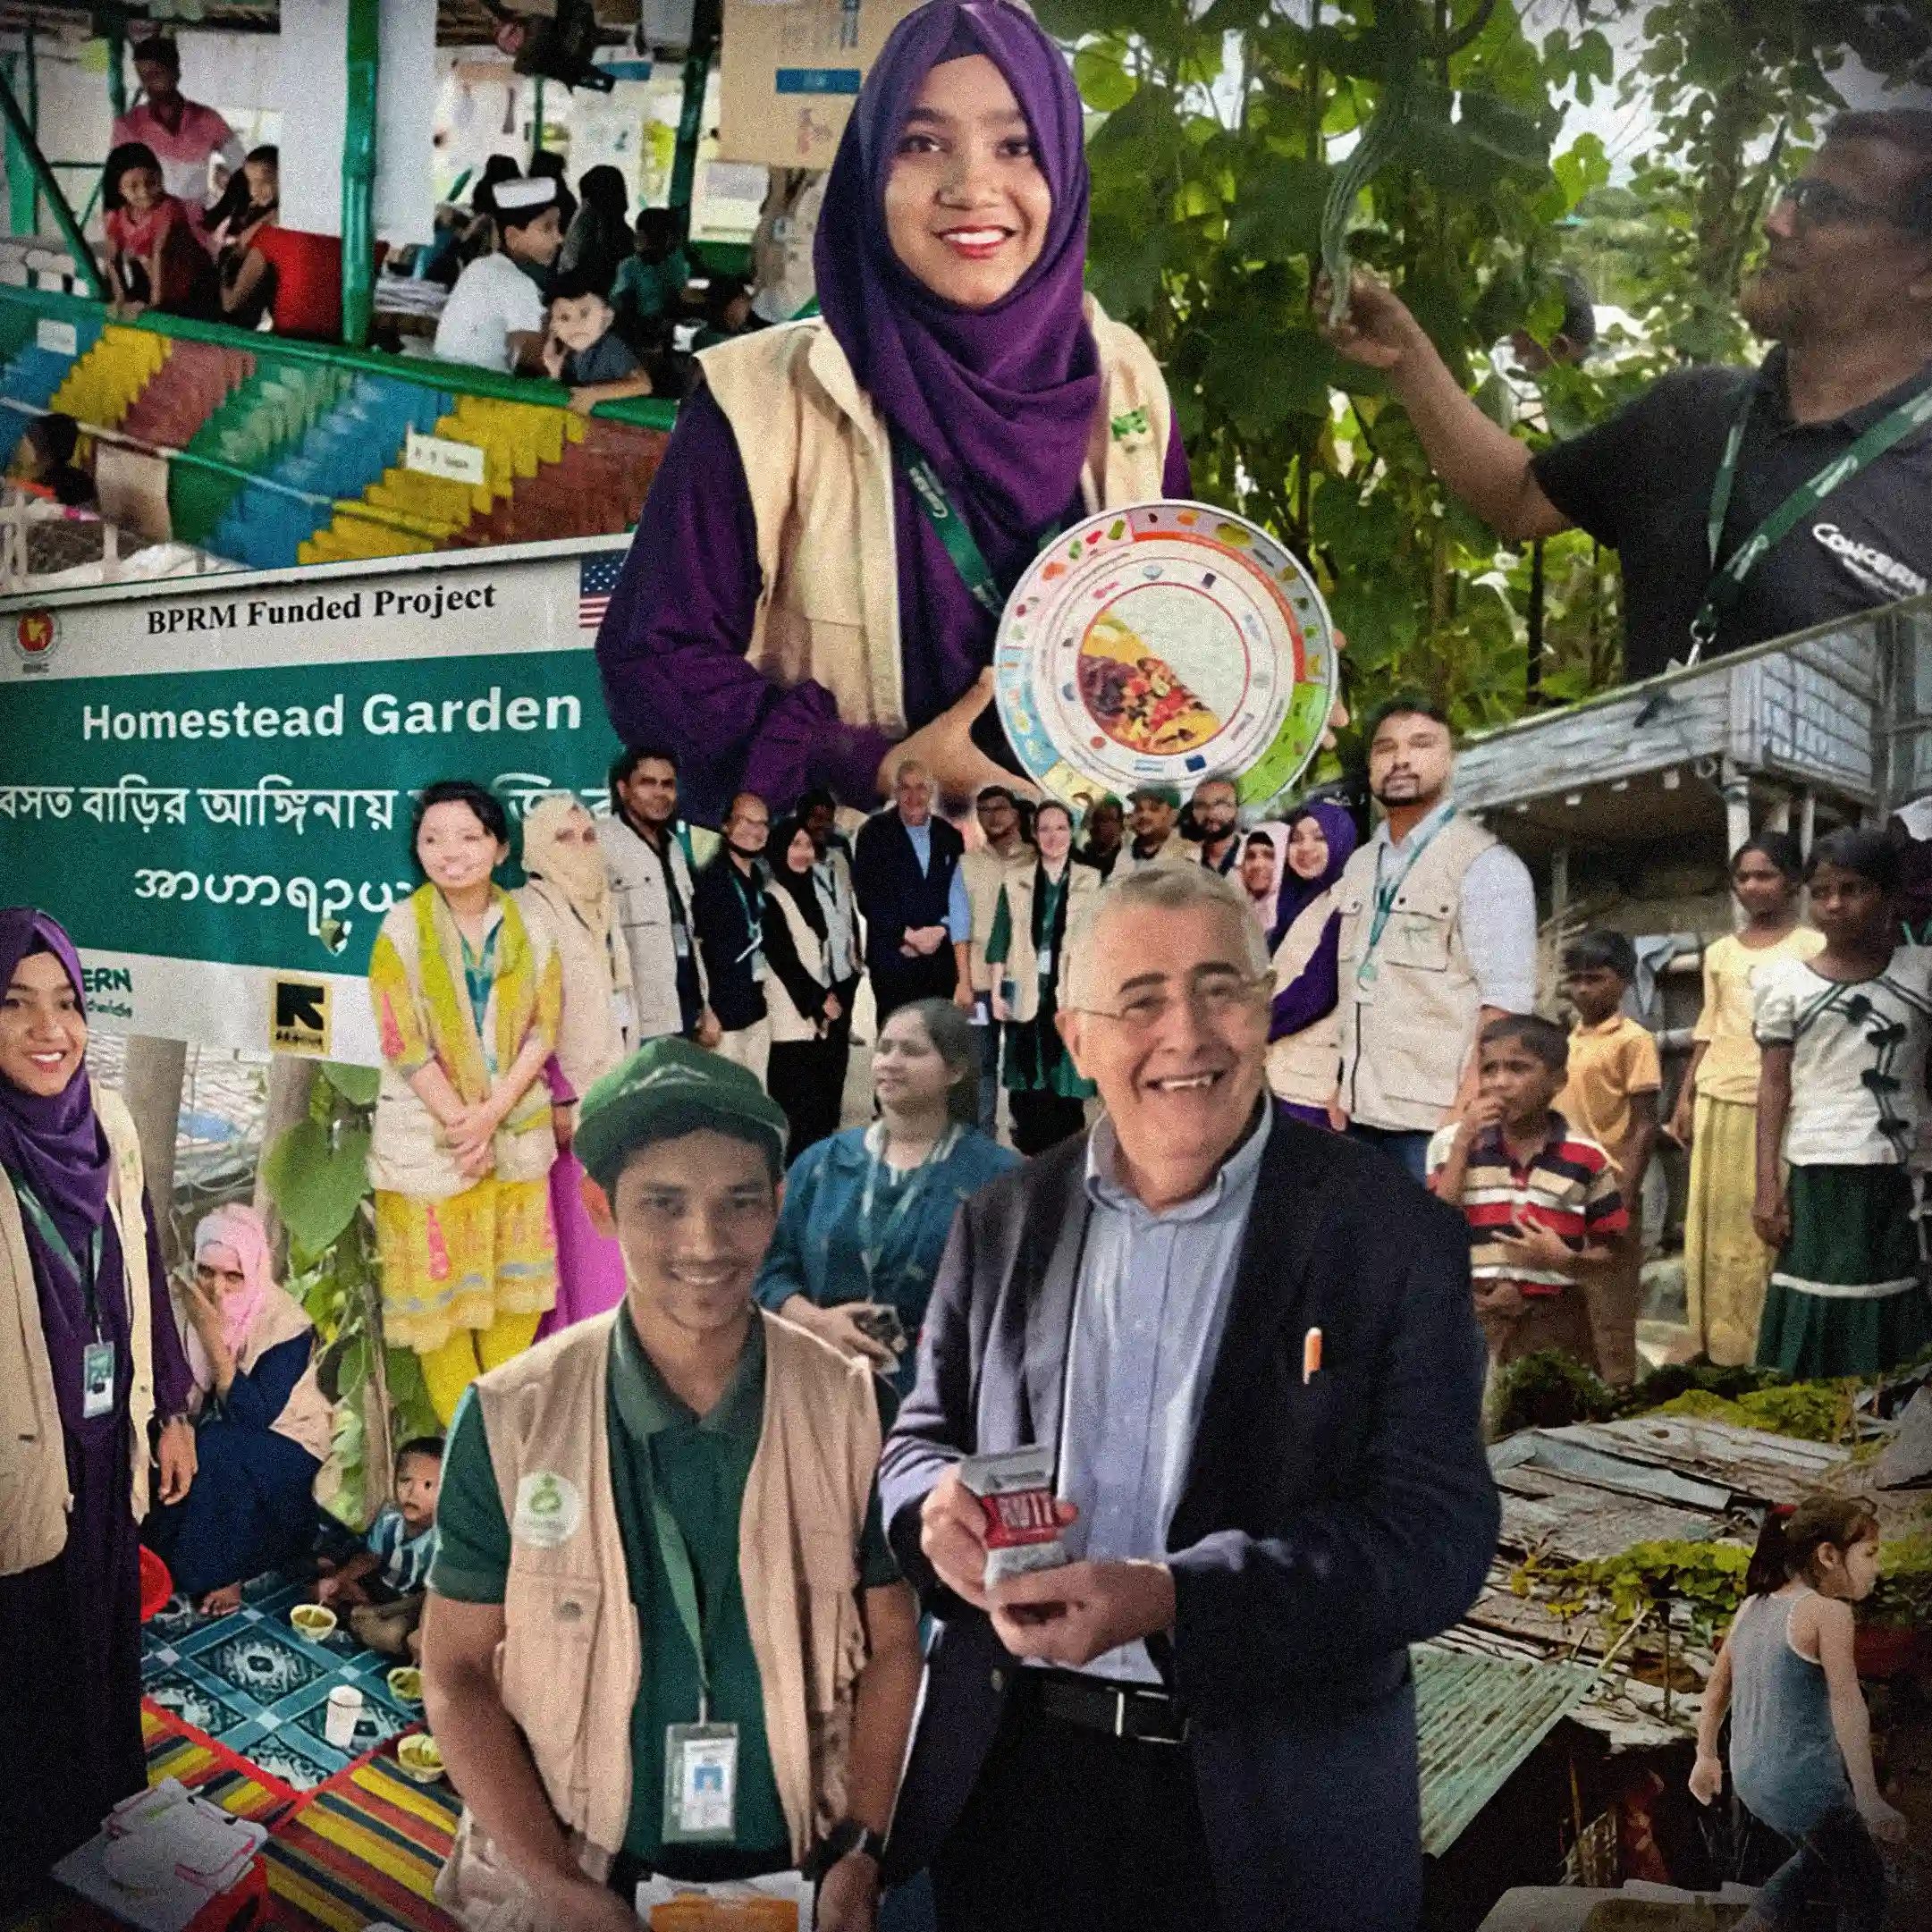 A collage featuring Concern Worldwide staff members in Bangladesh